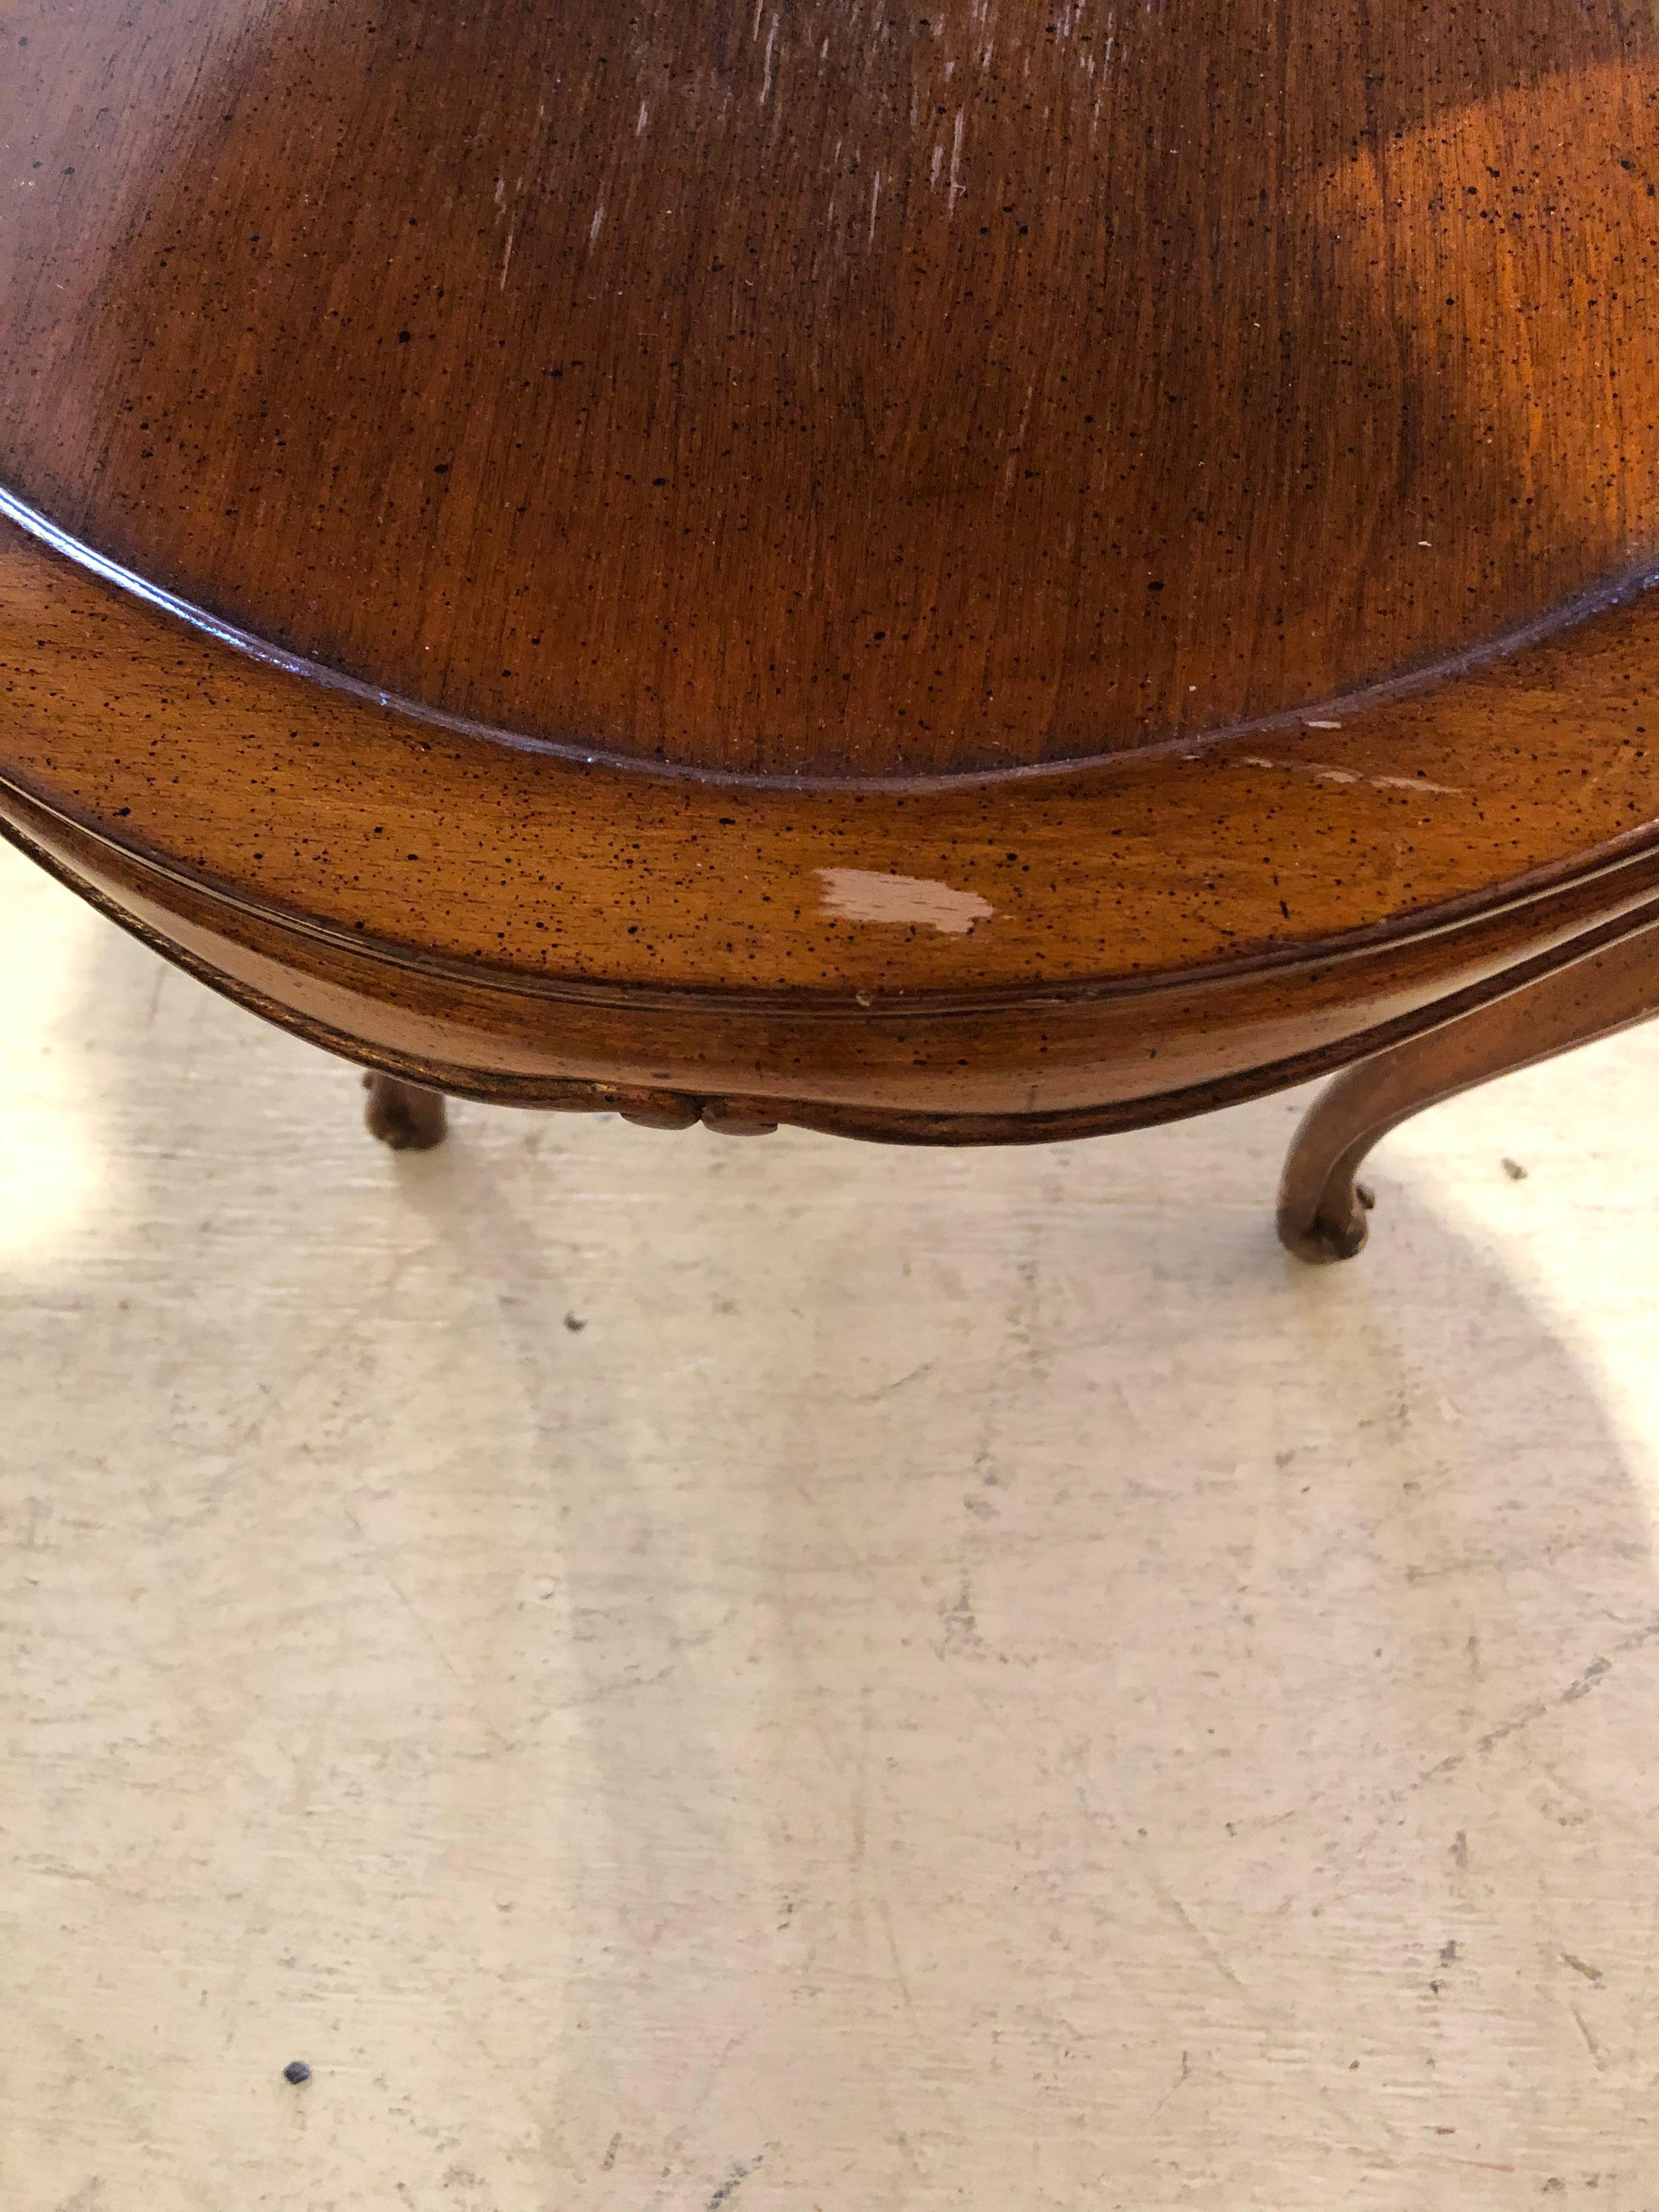 Refined French Provincial Style Marble Inset Two-Tier Fruitwood Oval Side Table In Good Condition For Sale In Hopewell, NJ